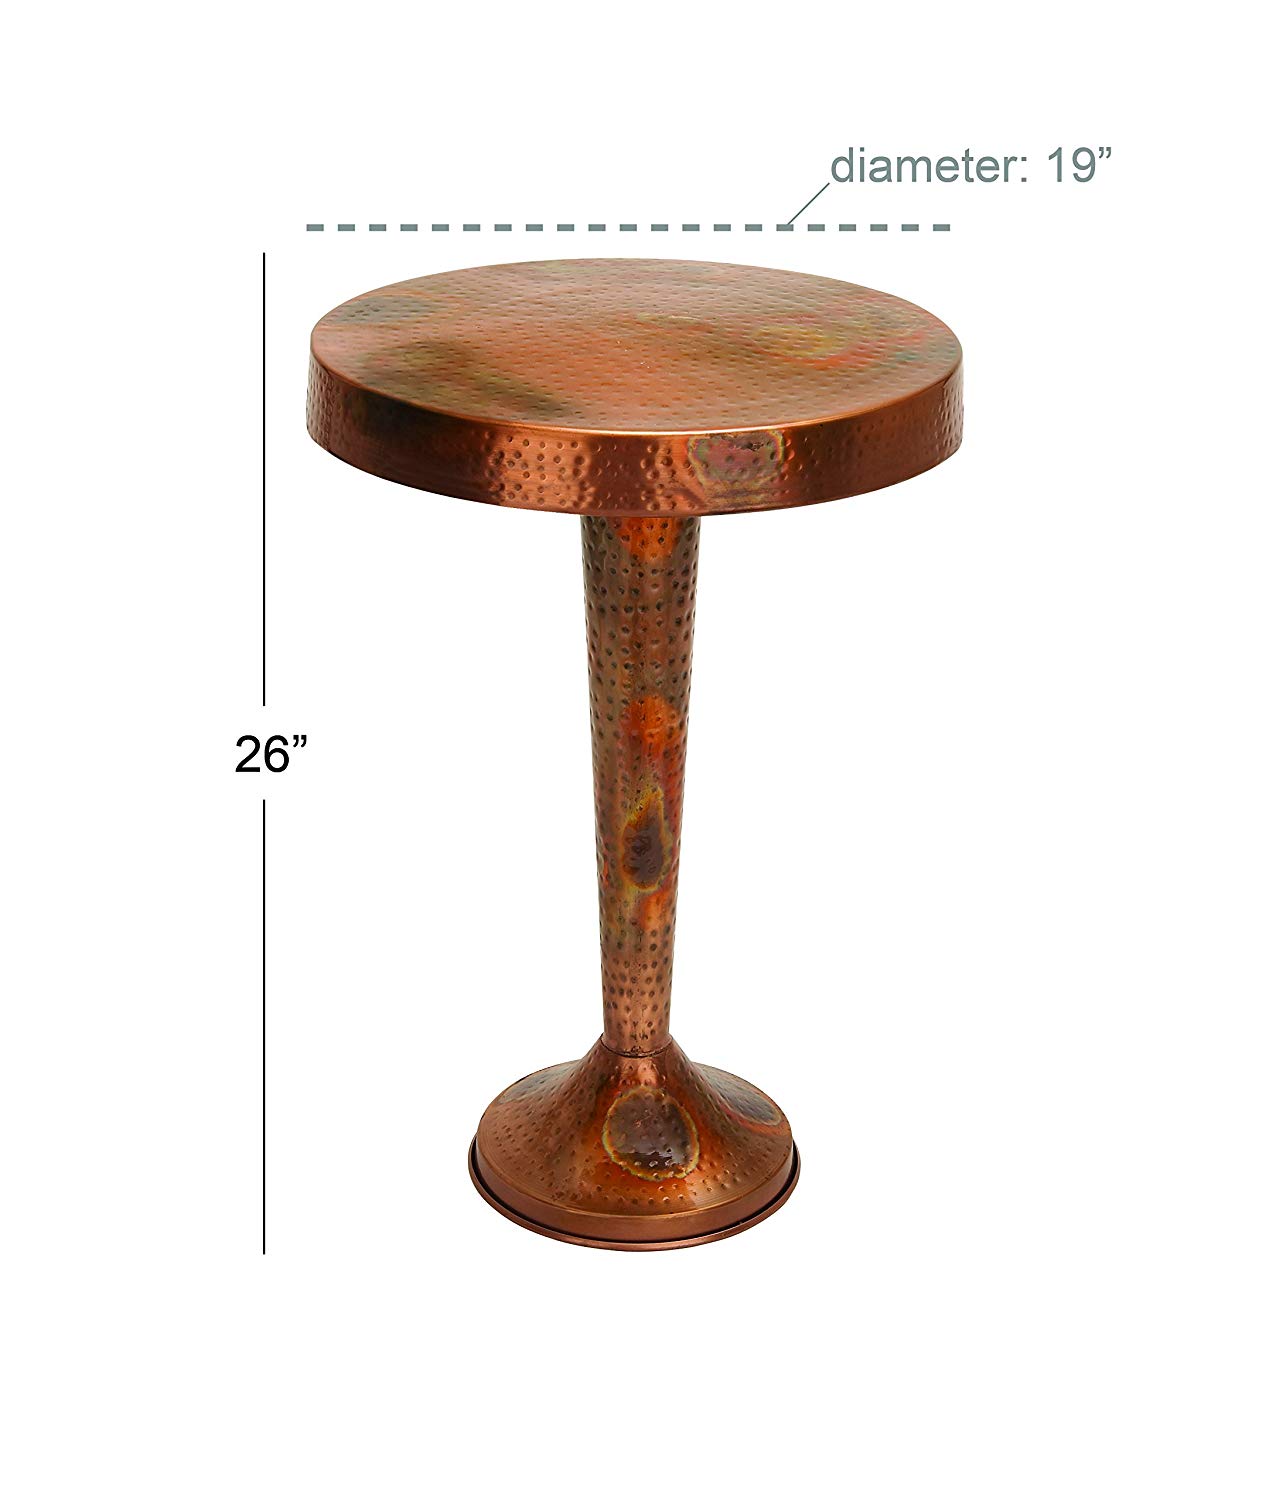 deco metal copper accent table inch drum kitchen dining glass side with marble feet small garden furniture sets chesterfield sofa heavy duty umbrella stand lamp shades half moon